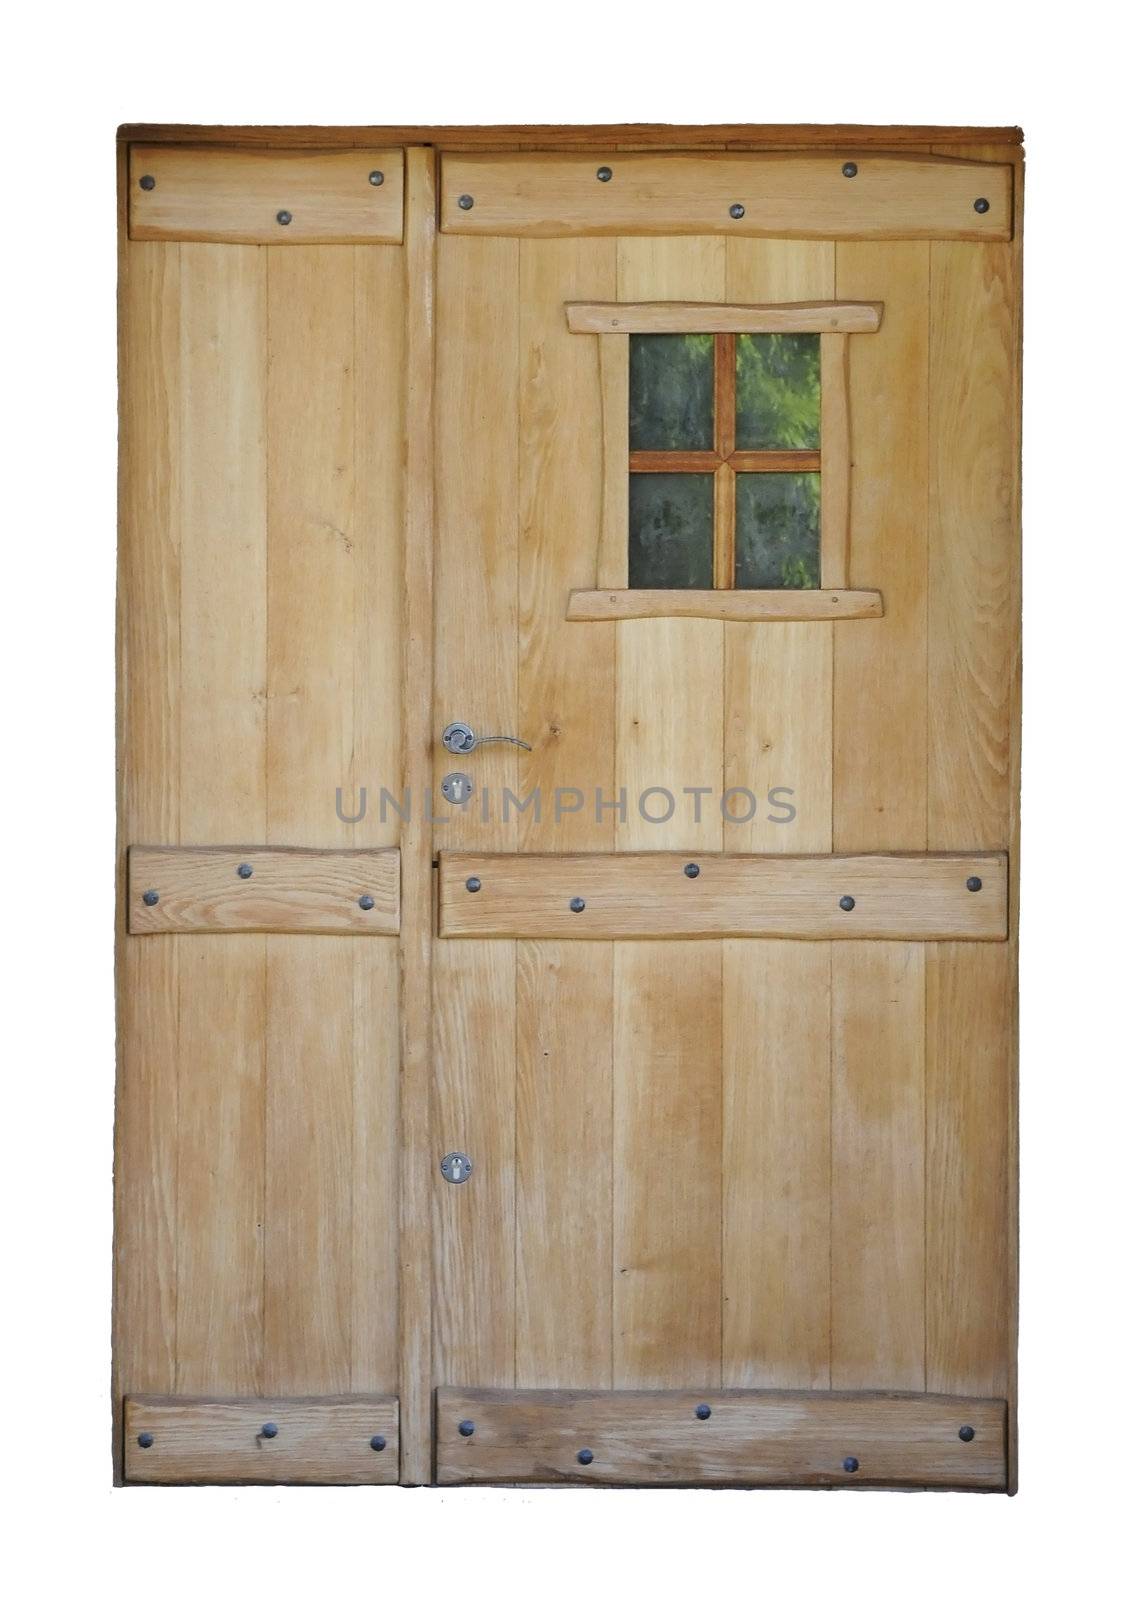 Wood door with a little window on a white background